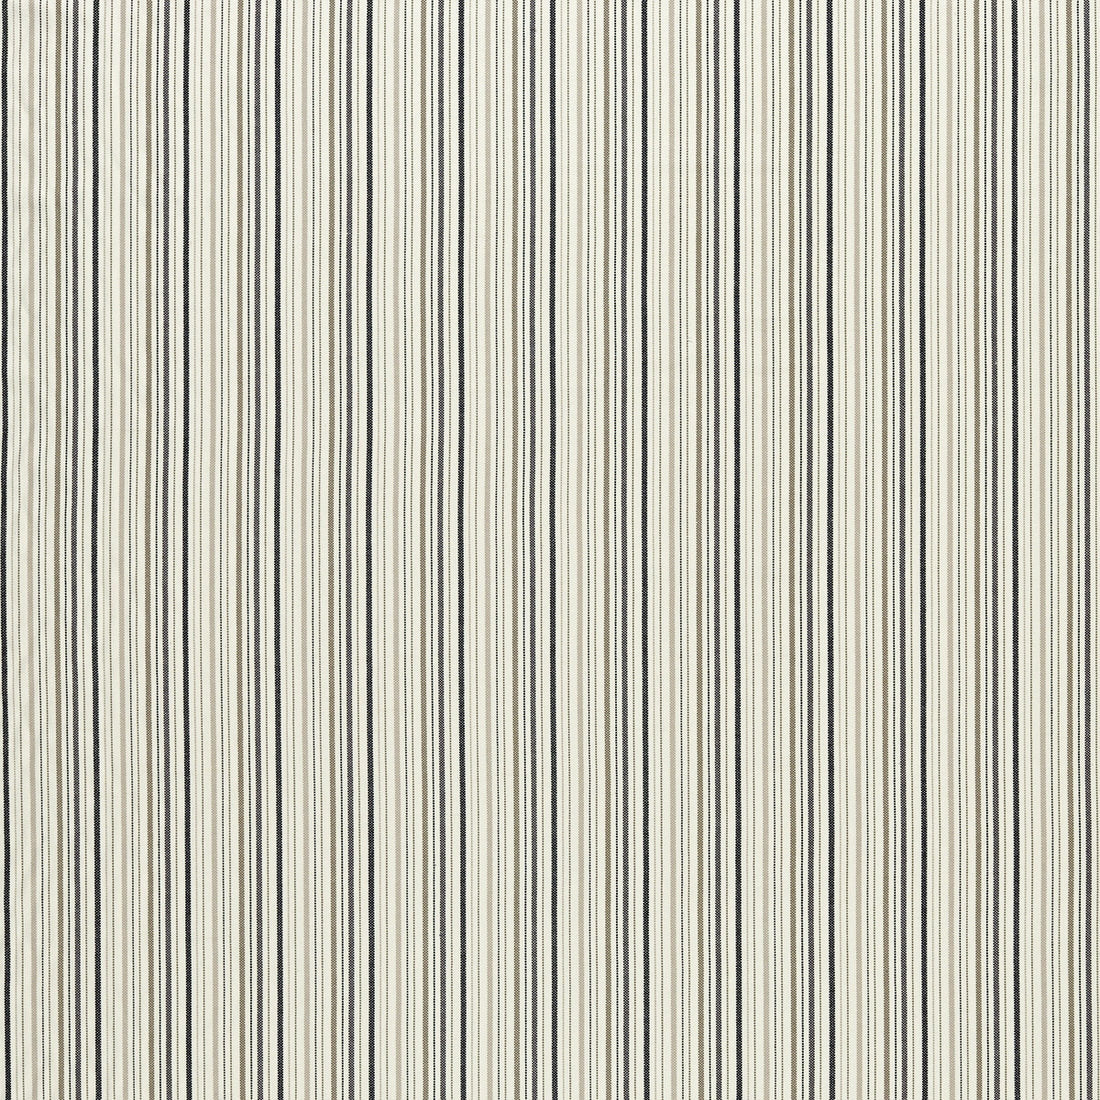 Maryland fabric in charcoal/natural color - pattern F1501/01.CAC.0 - by Clarke And Clarke in the Clarke &amp; Clarke Edgeworth collection